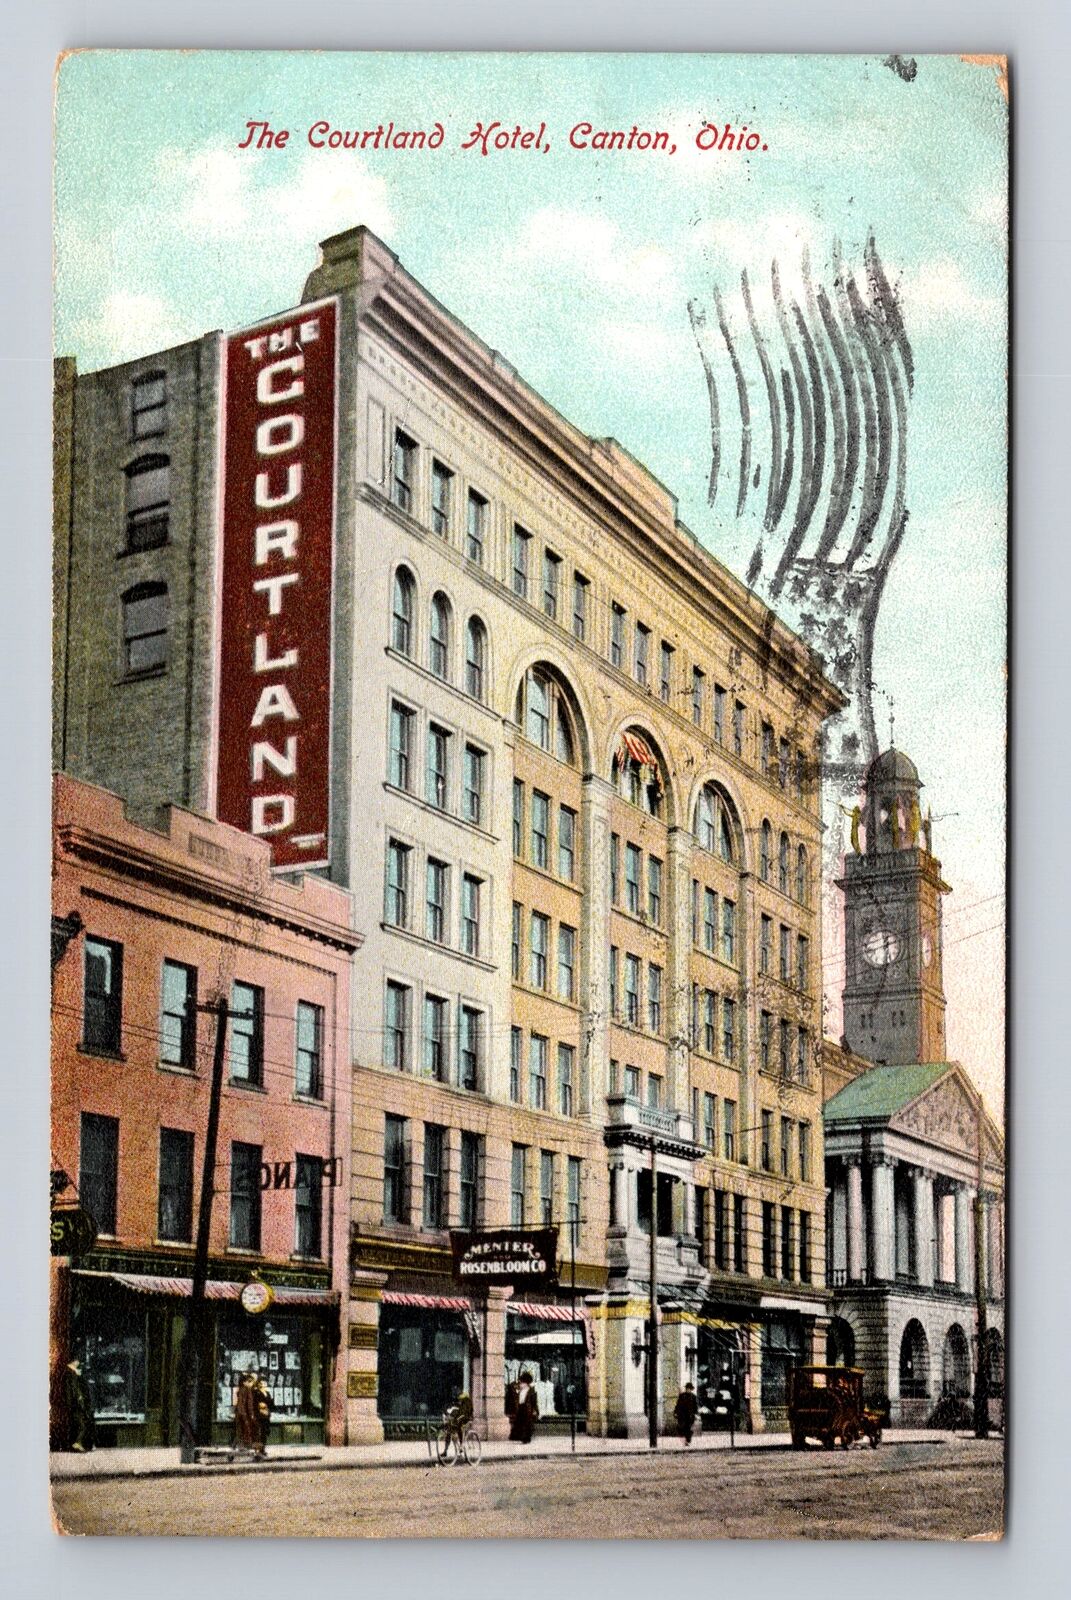 Canton OH-Ohio, The Courtland Hotel Shoppers Clock Tower, Vintage c1910 Postcard